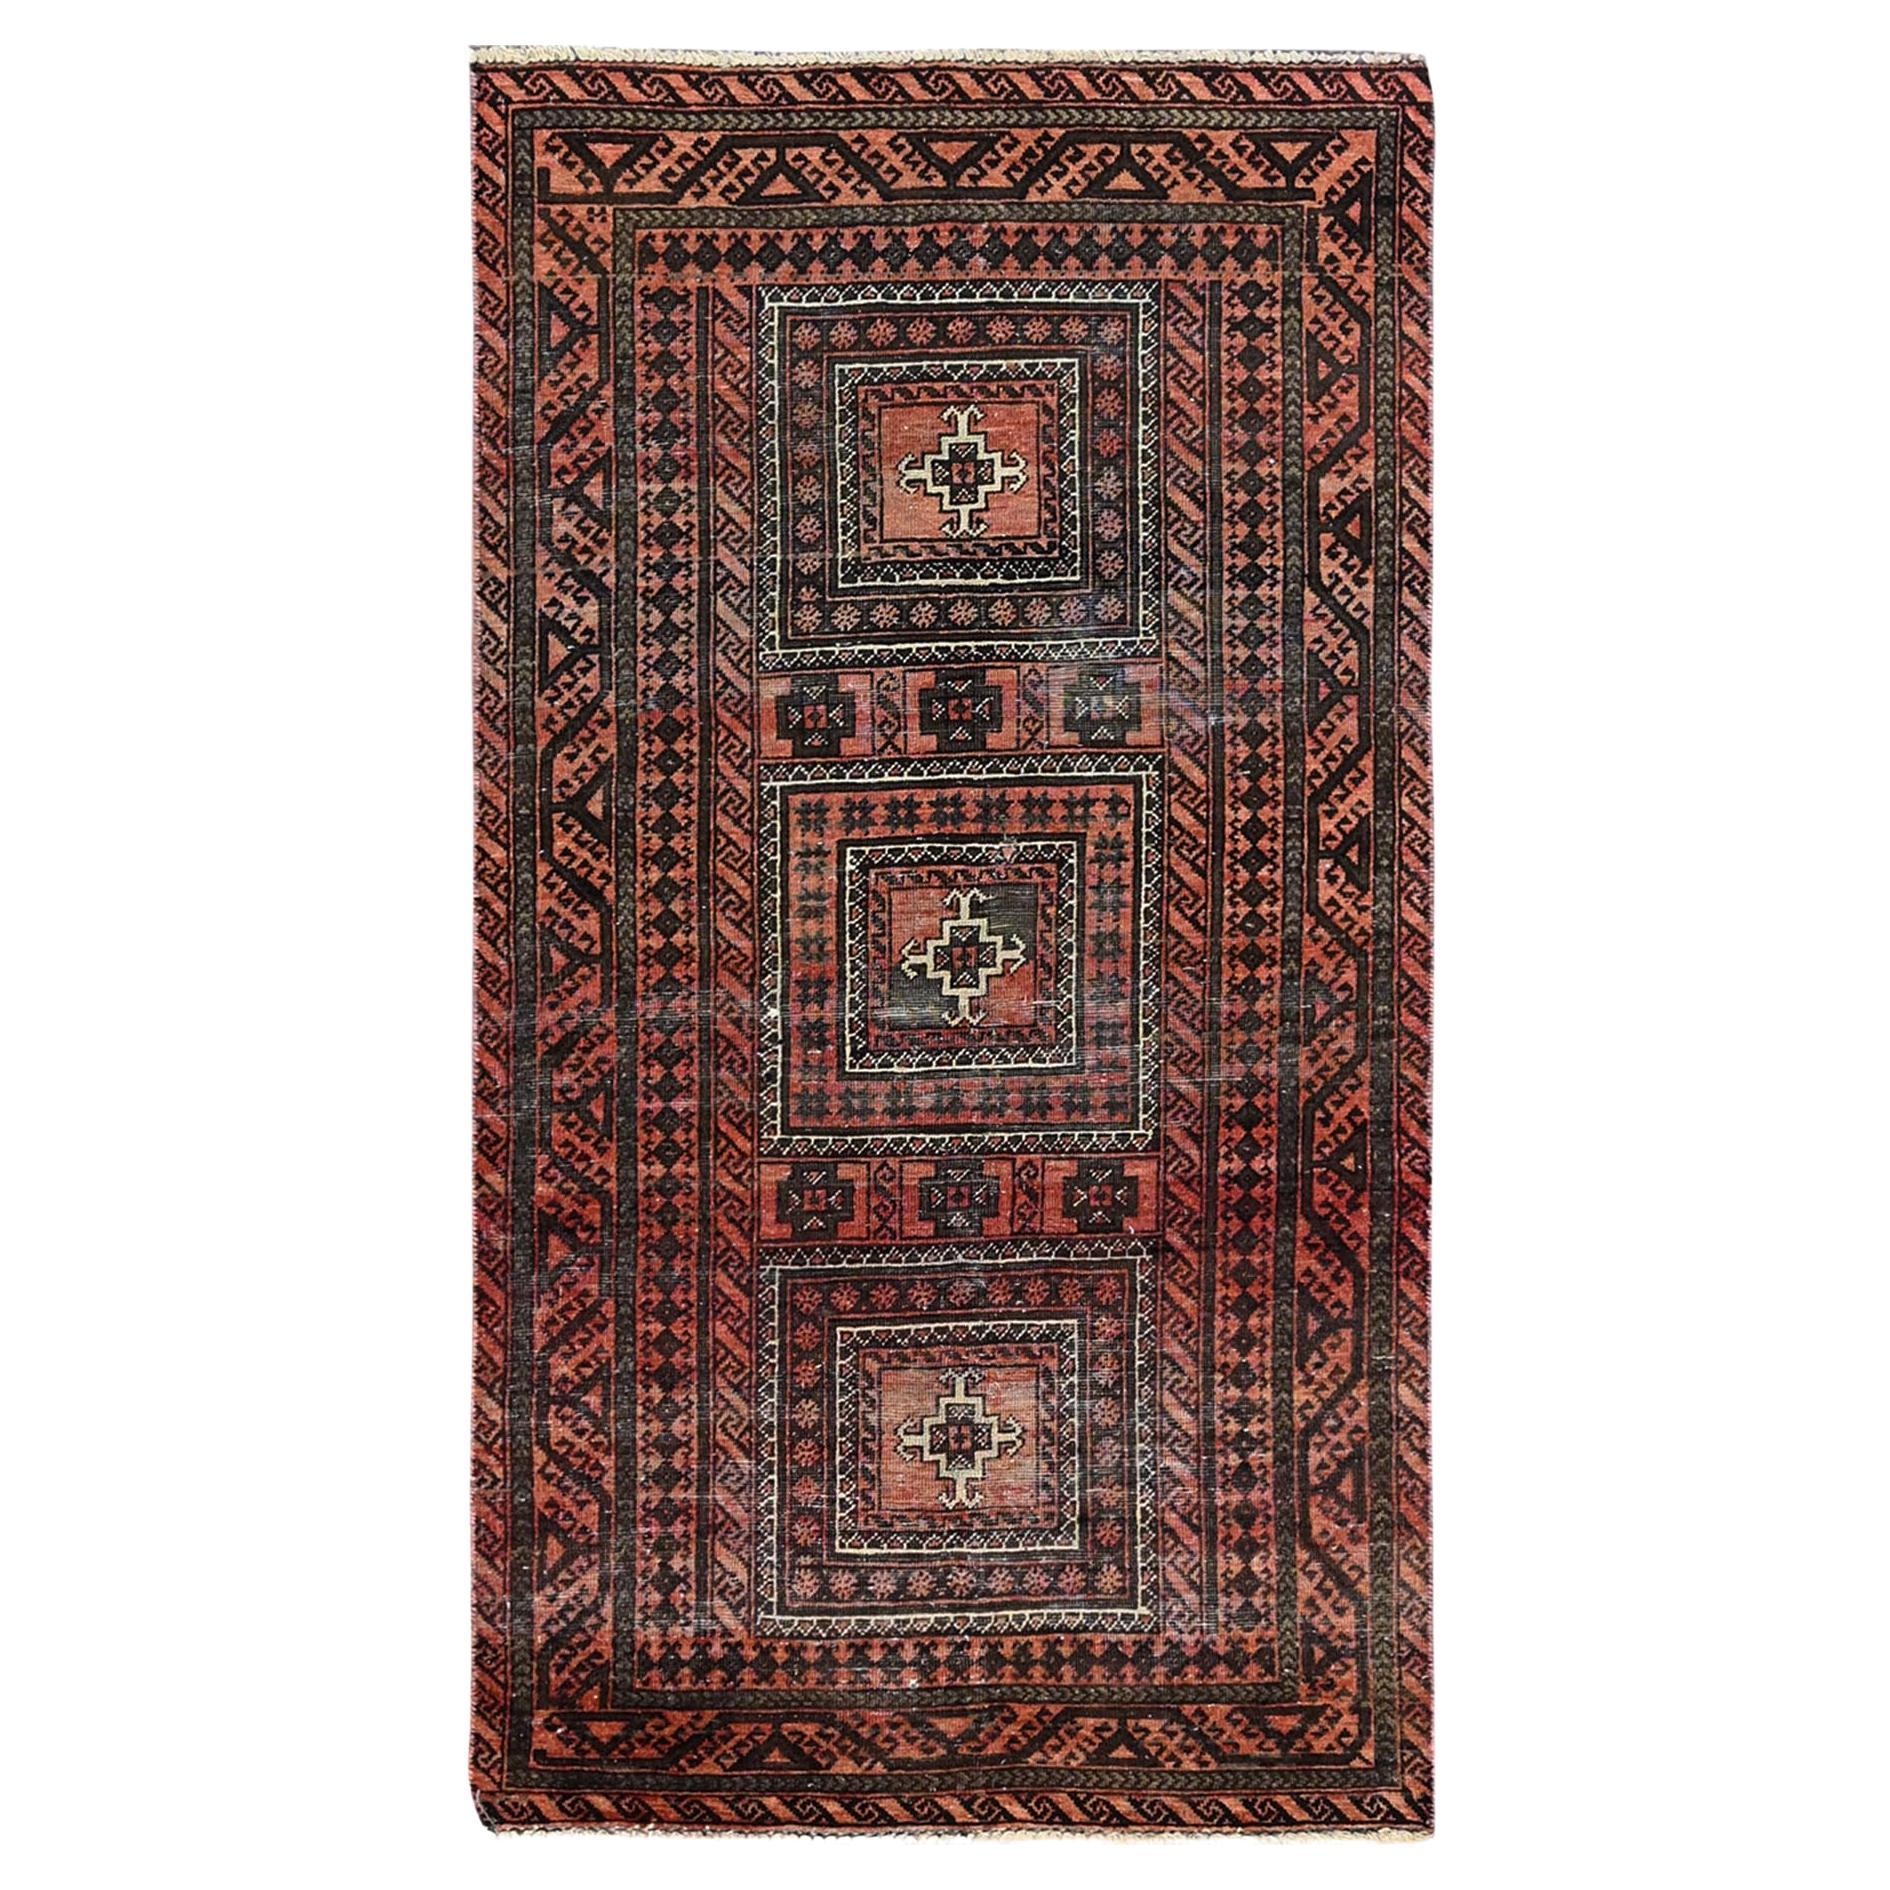 Brown Sheared Low Evenly Worn Vintage Persian Baluch Multiple Border Clean Rug